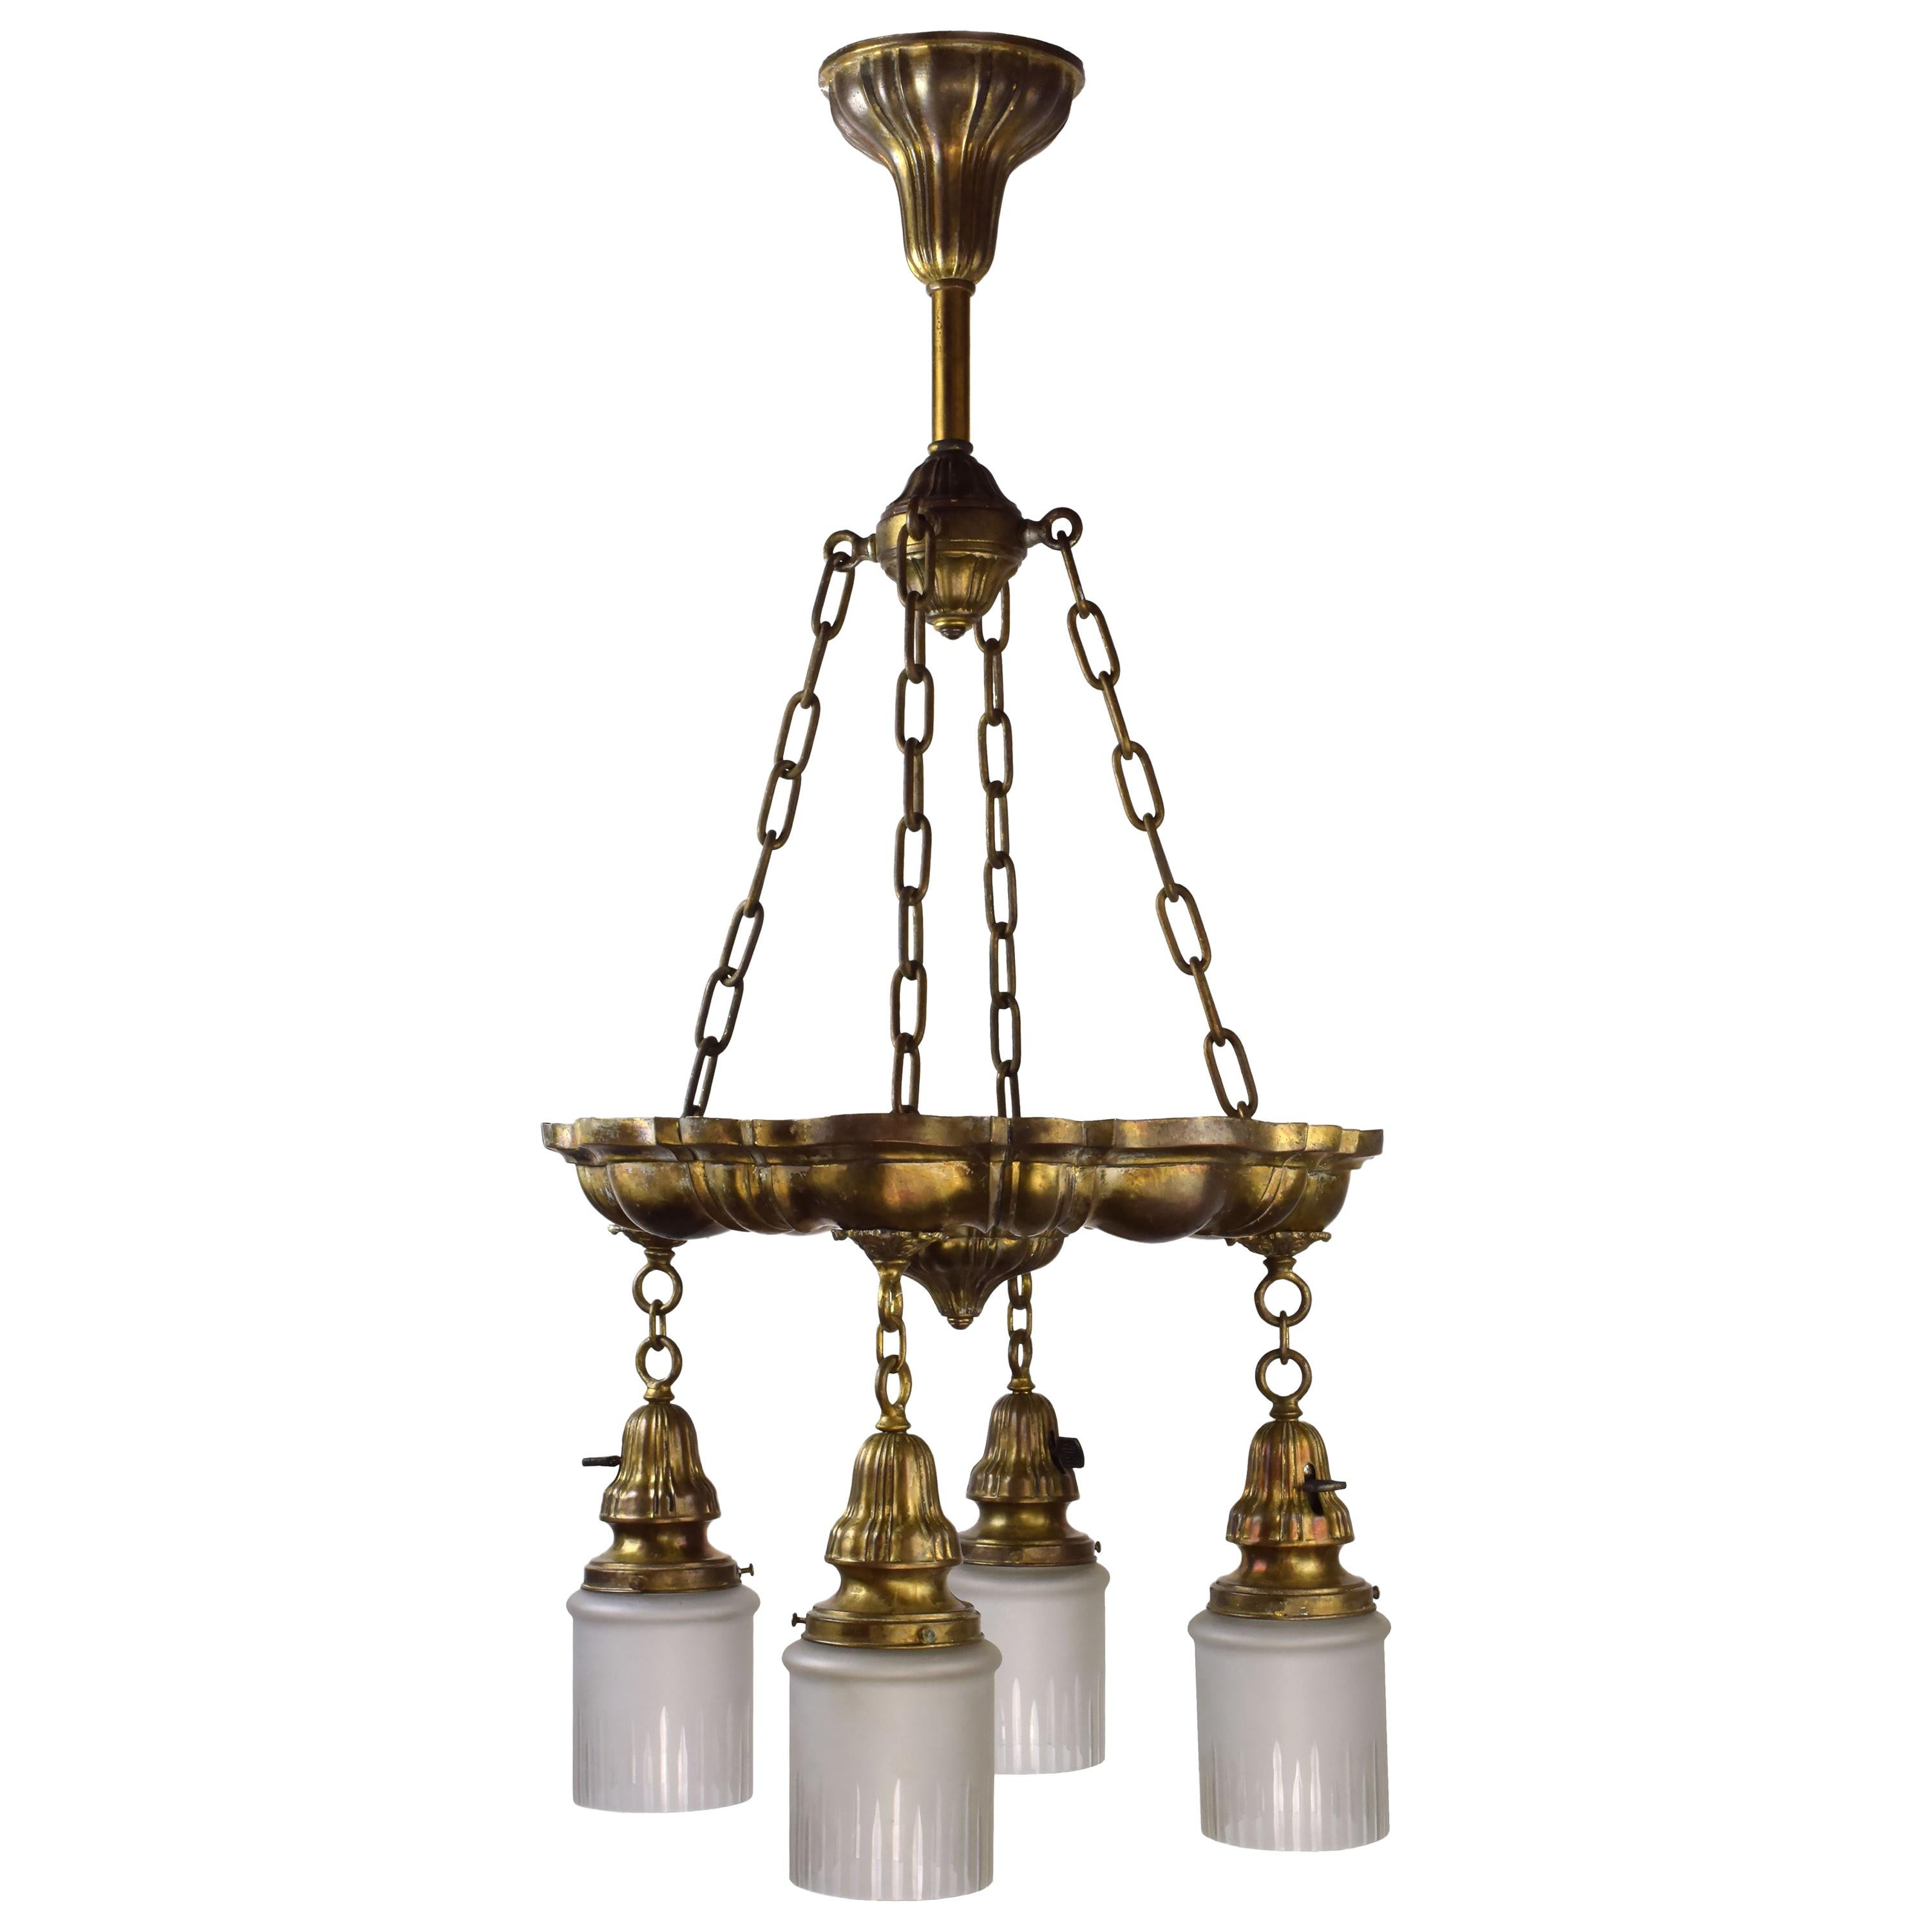 Sheffield Pan Fixture in Brass with Glass Shades